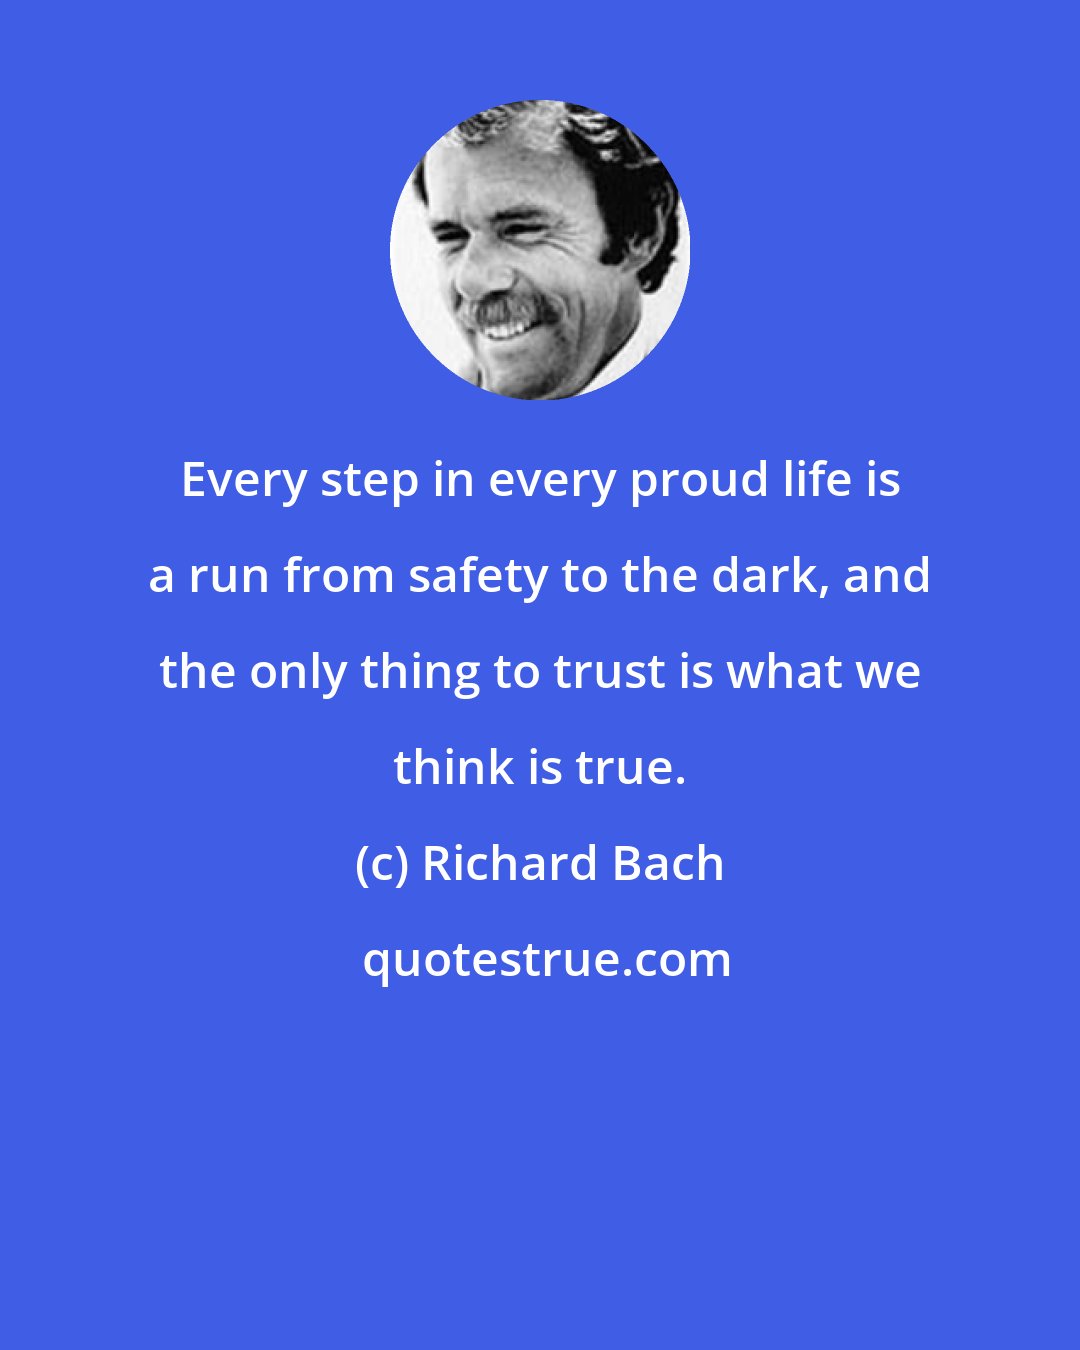 Richard Bach: Every step in every proud life is a run from safety to the dark, and the only thing to trust is what we think is true.